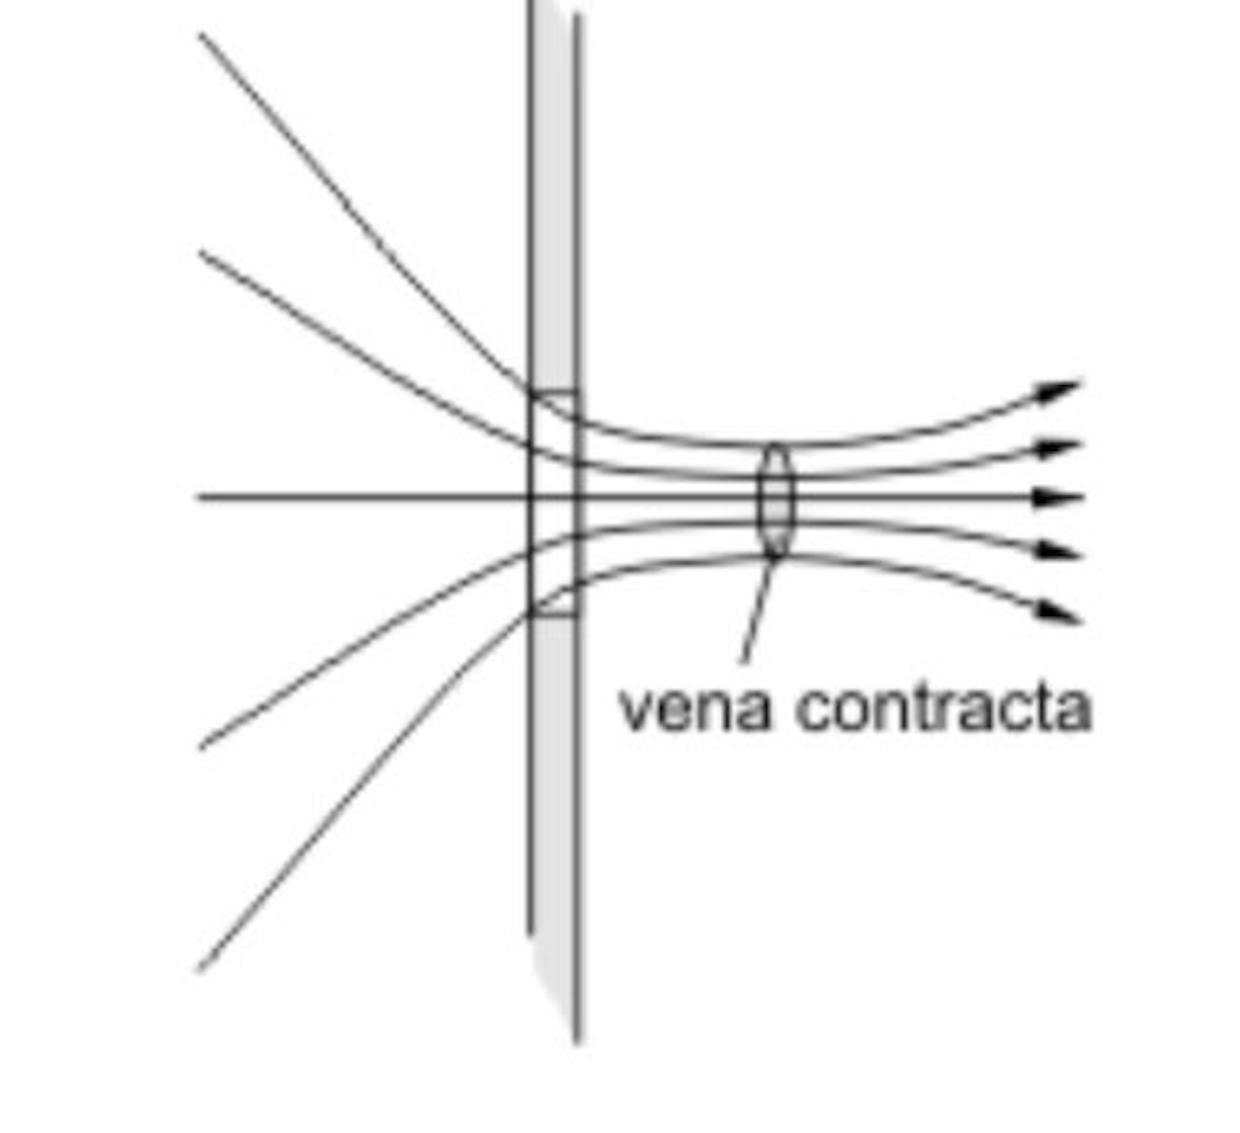 What is Vena Contract in Orifice?